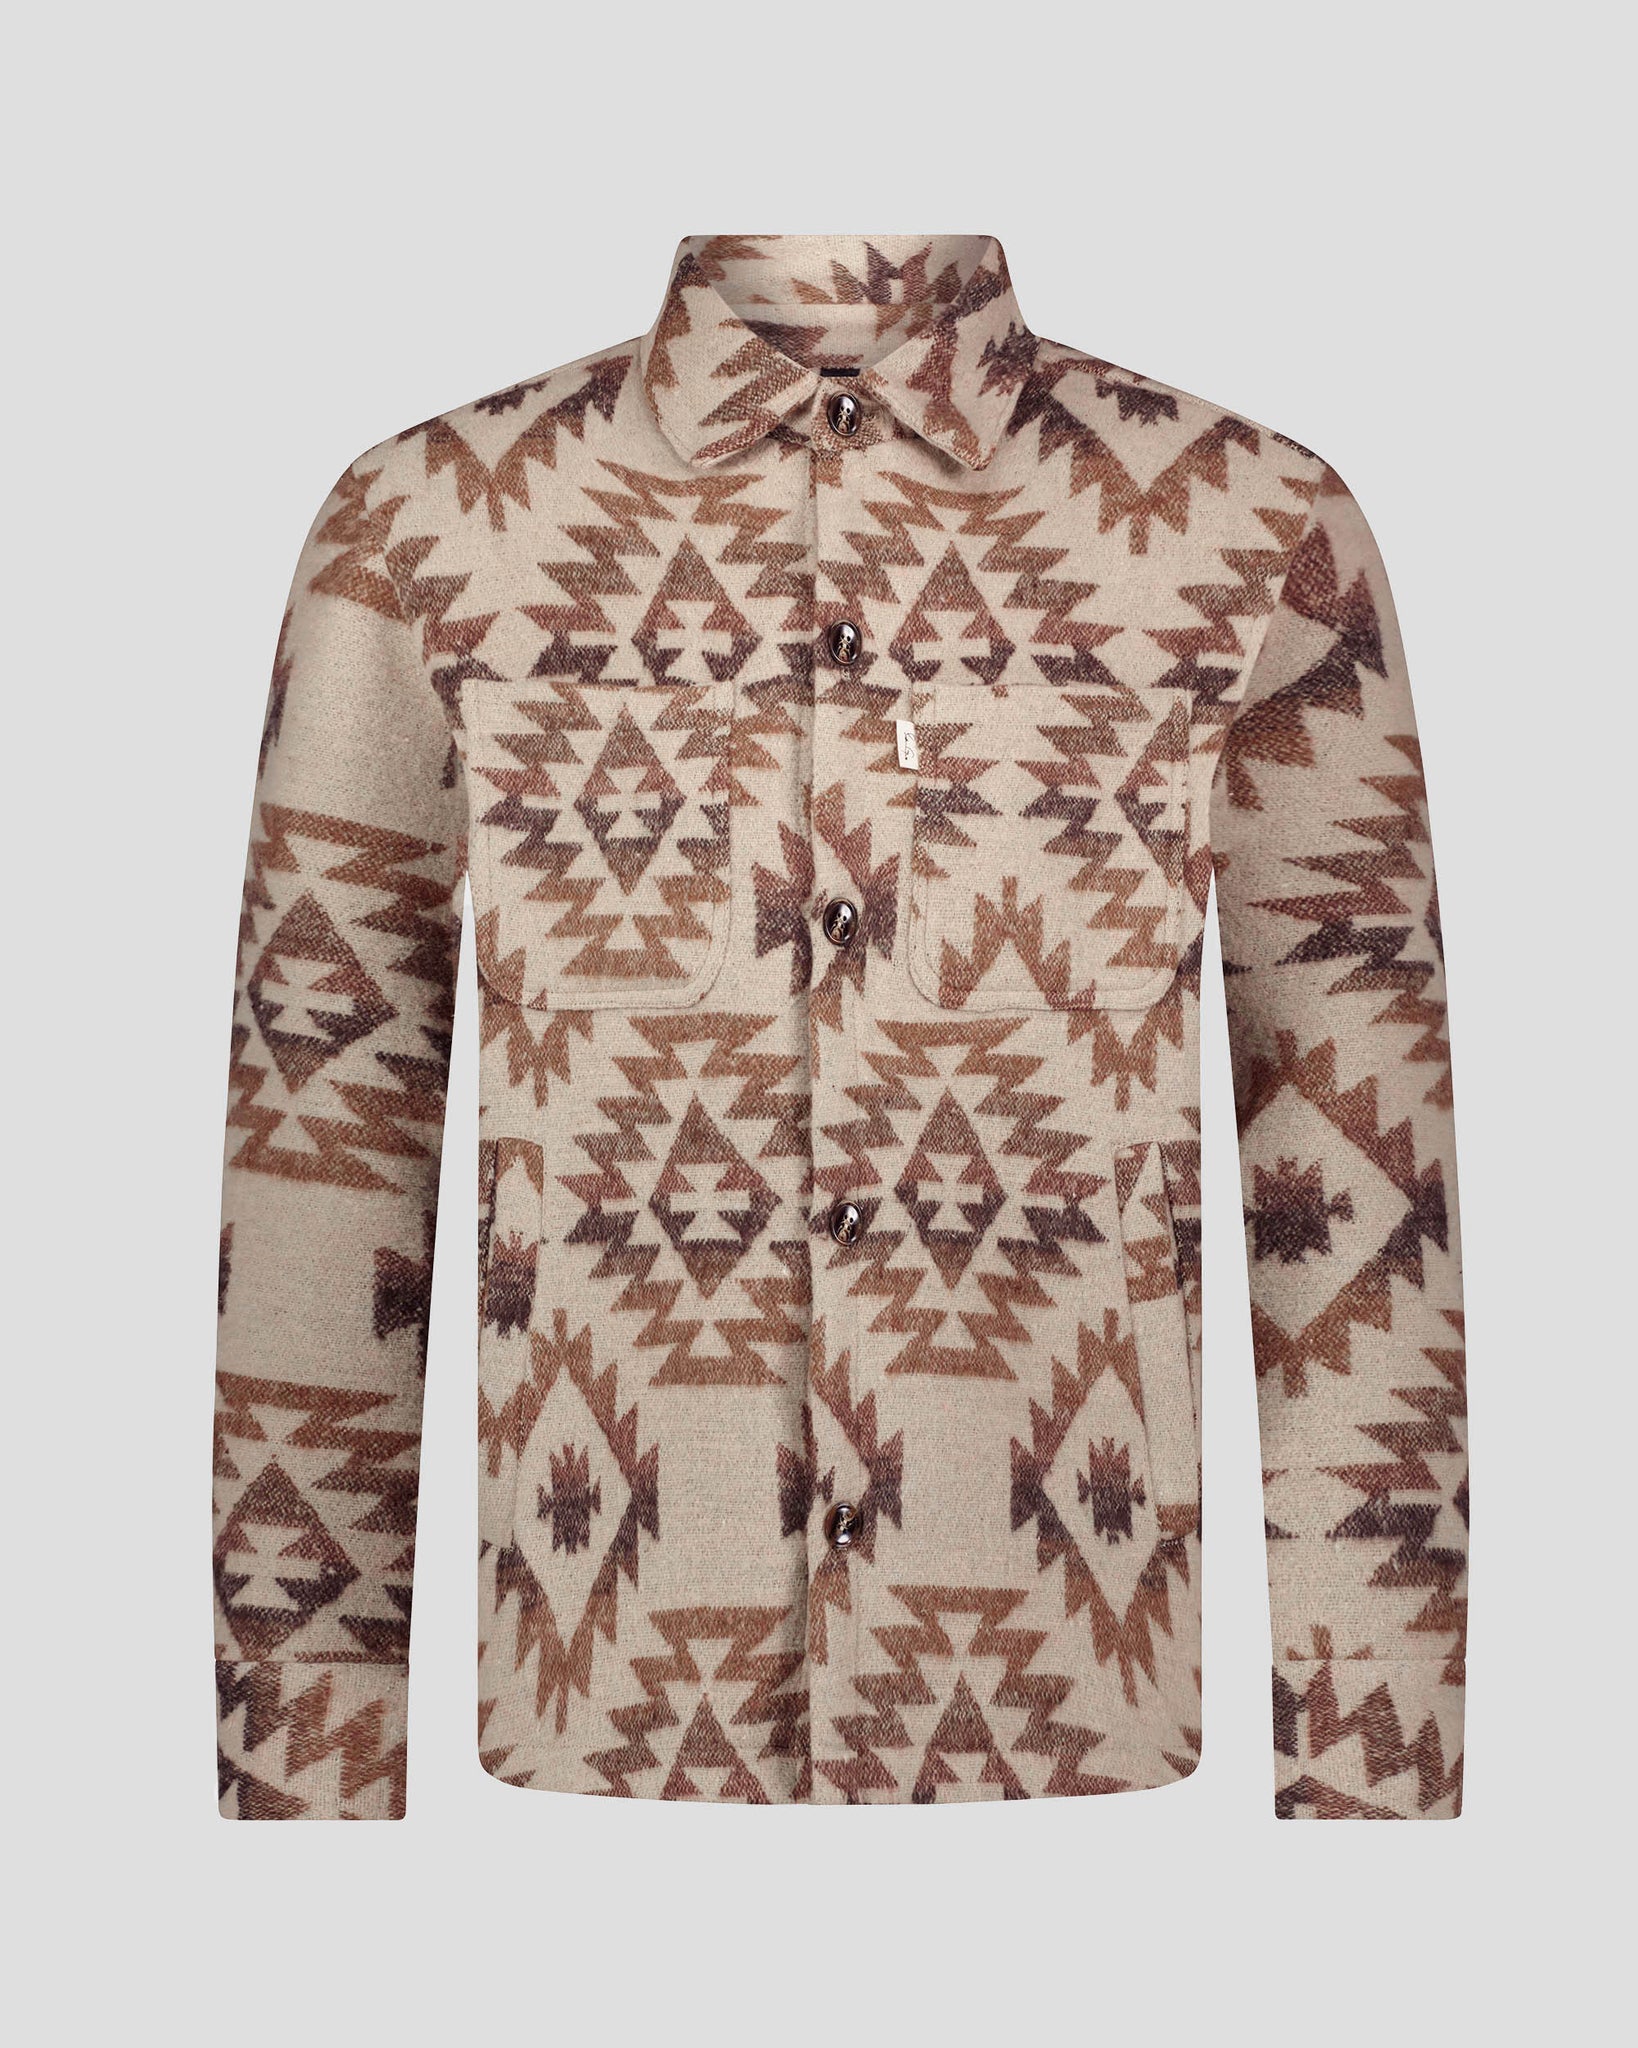 Southern Gents Aztec Overshirt - Brown